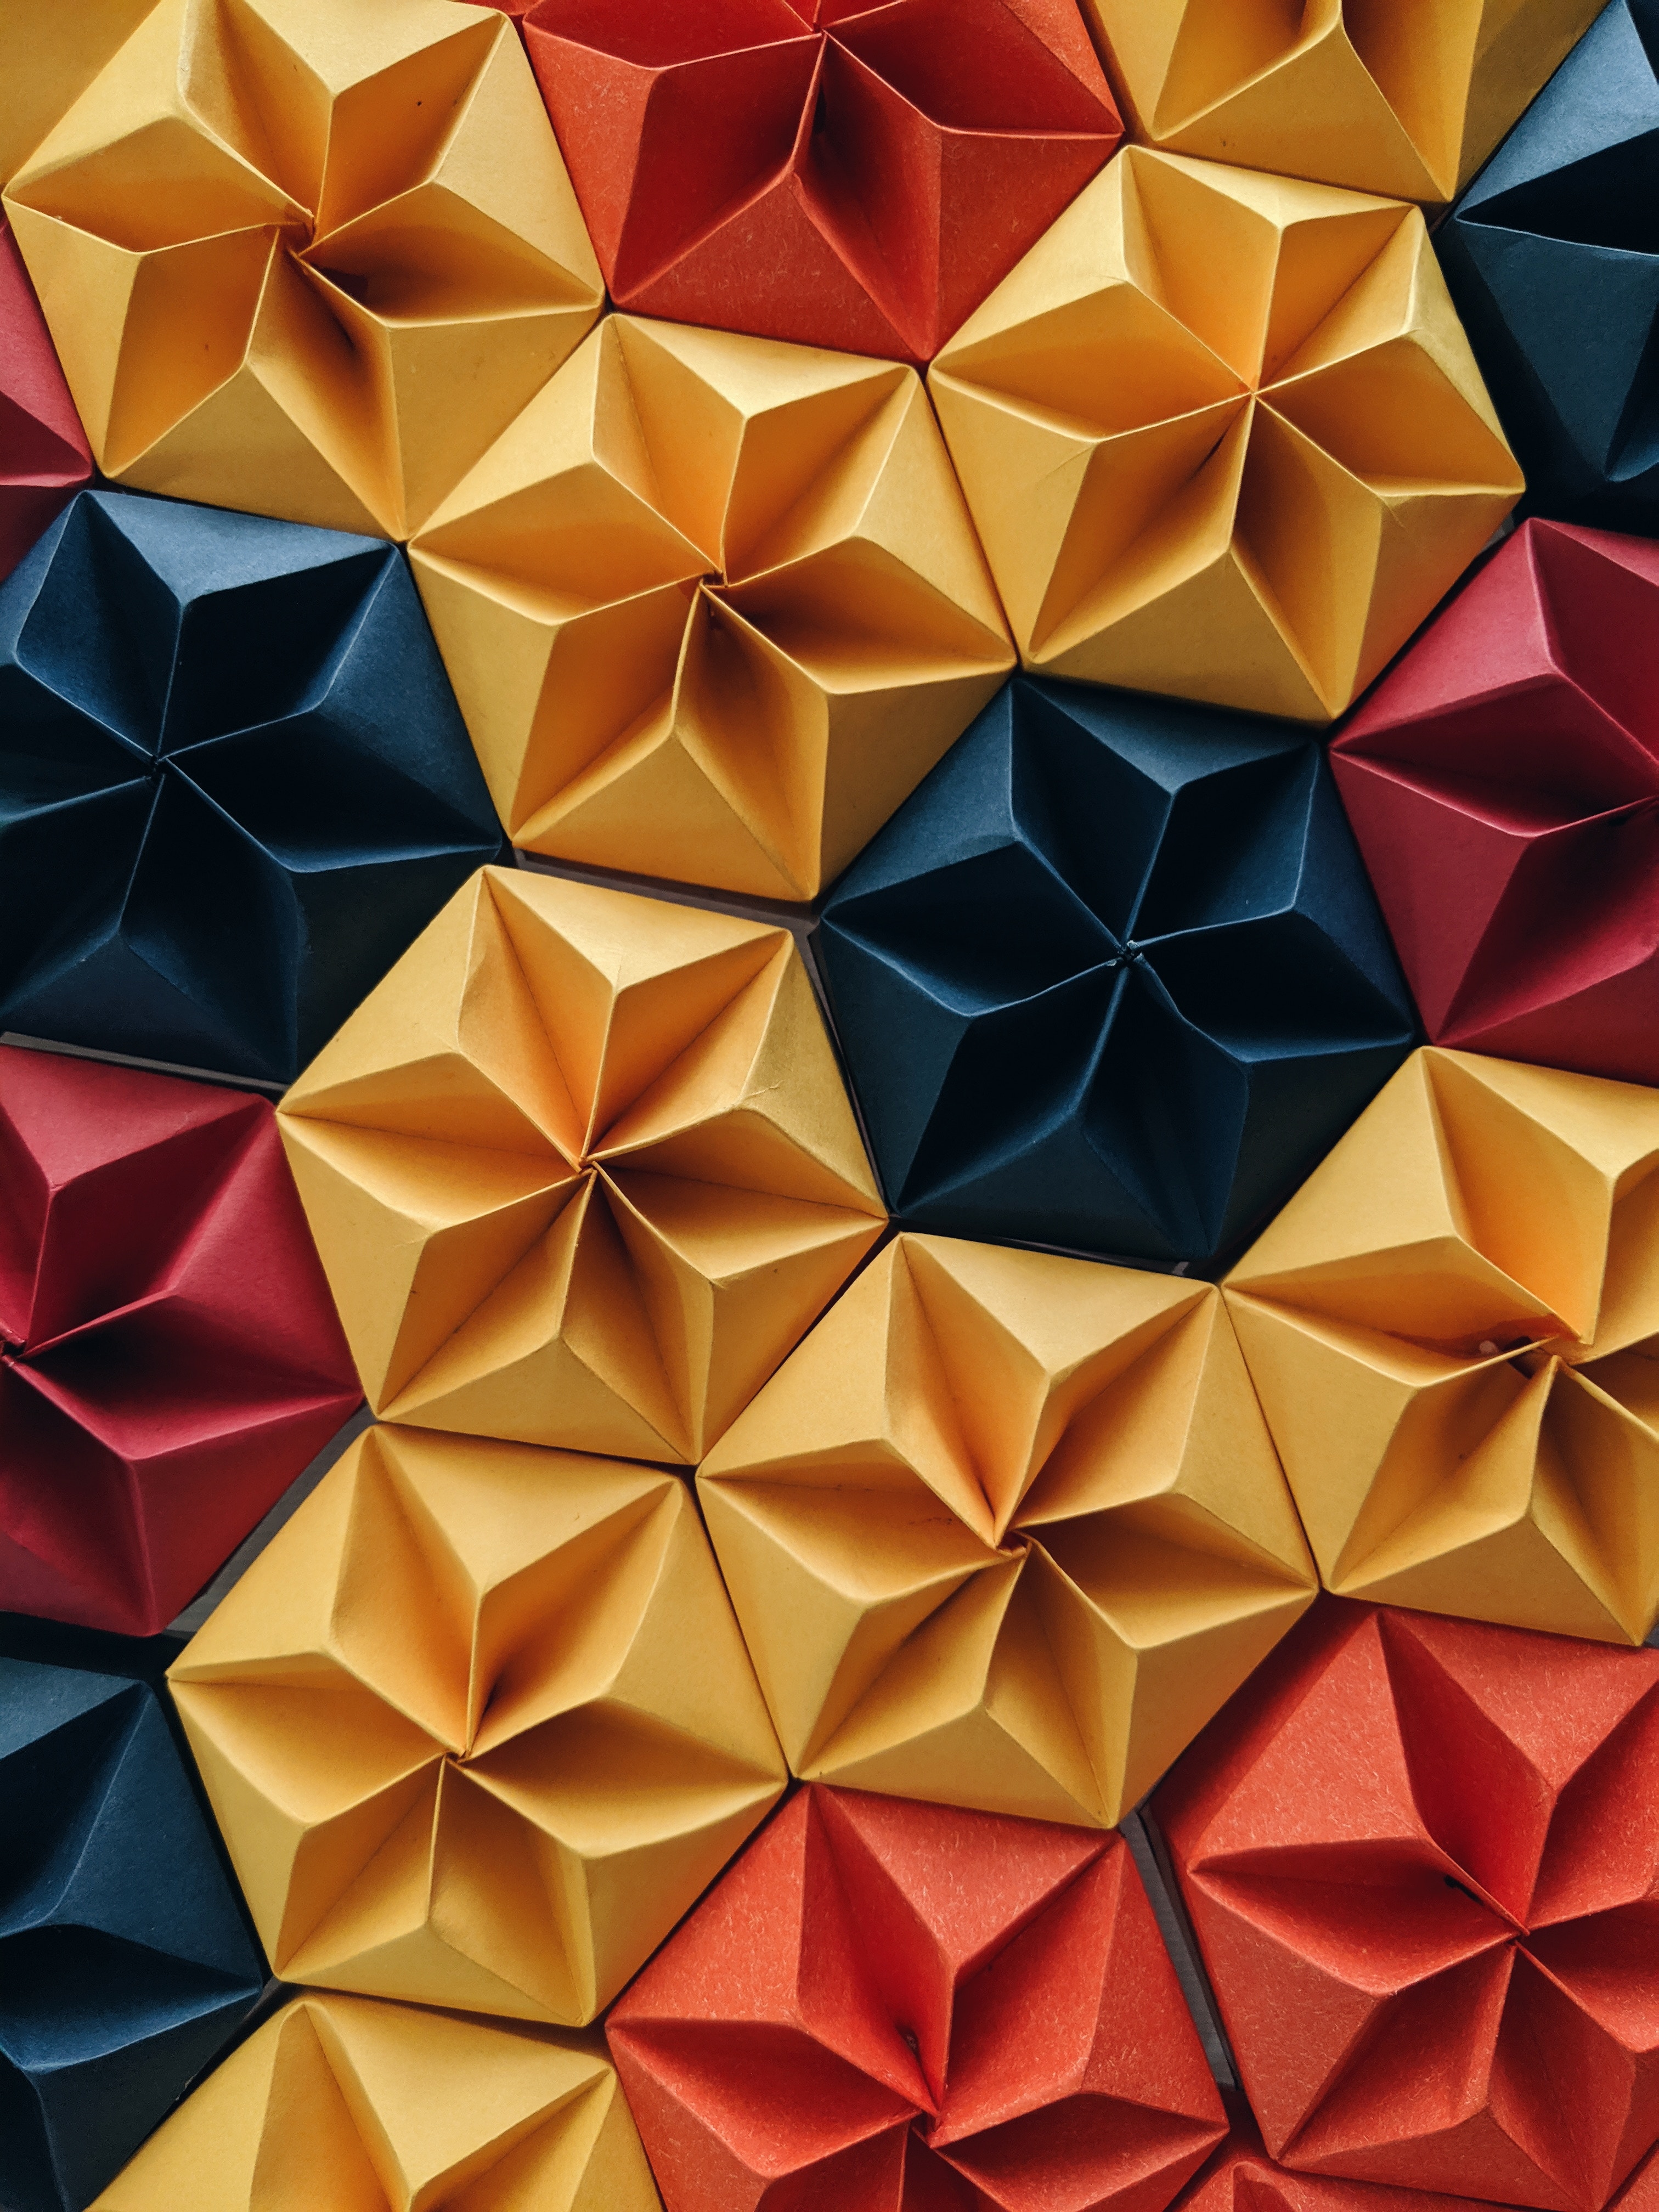 wallpapers multicolored, motley, texture, textures, shape, shapes, paper, origami